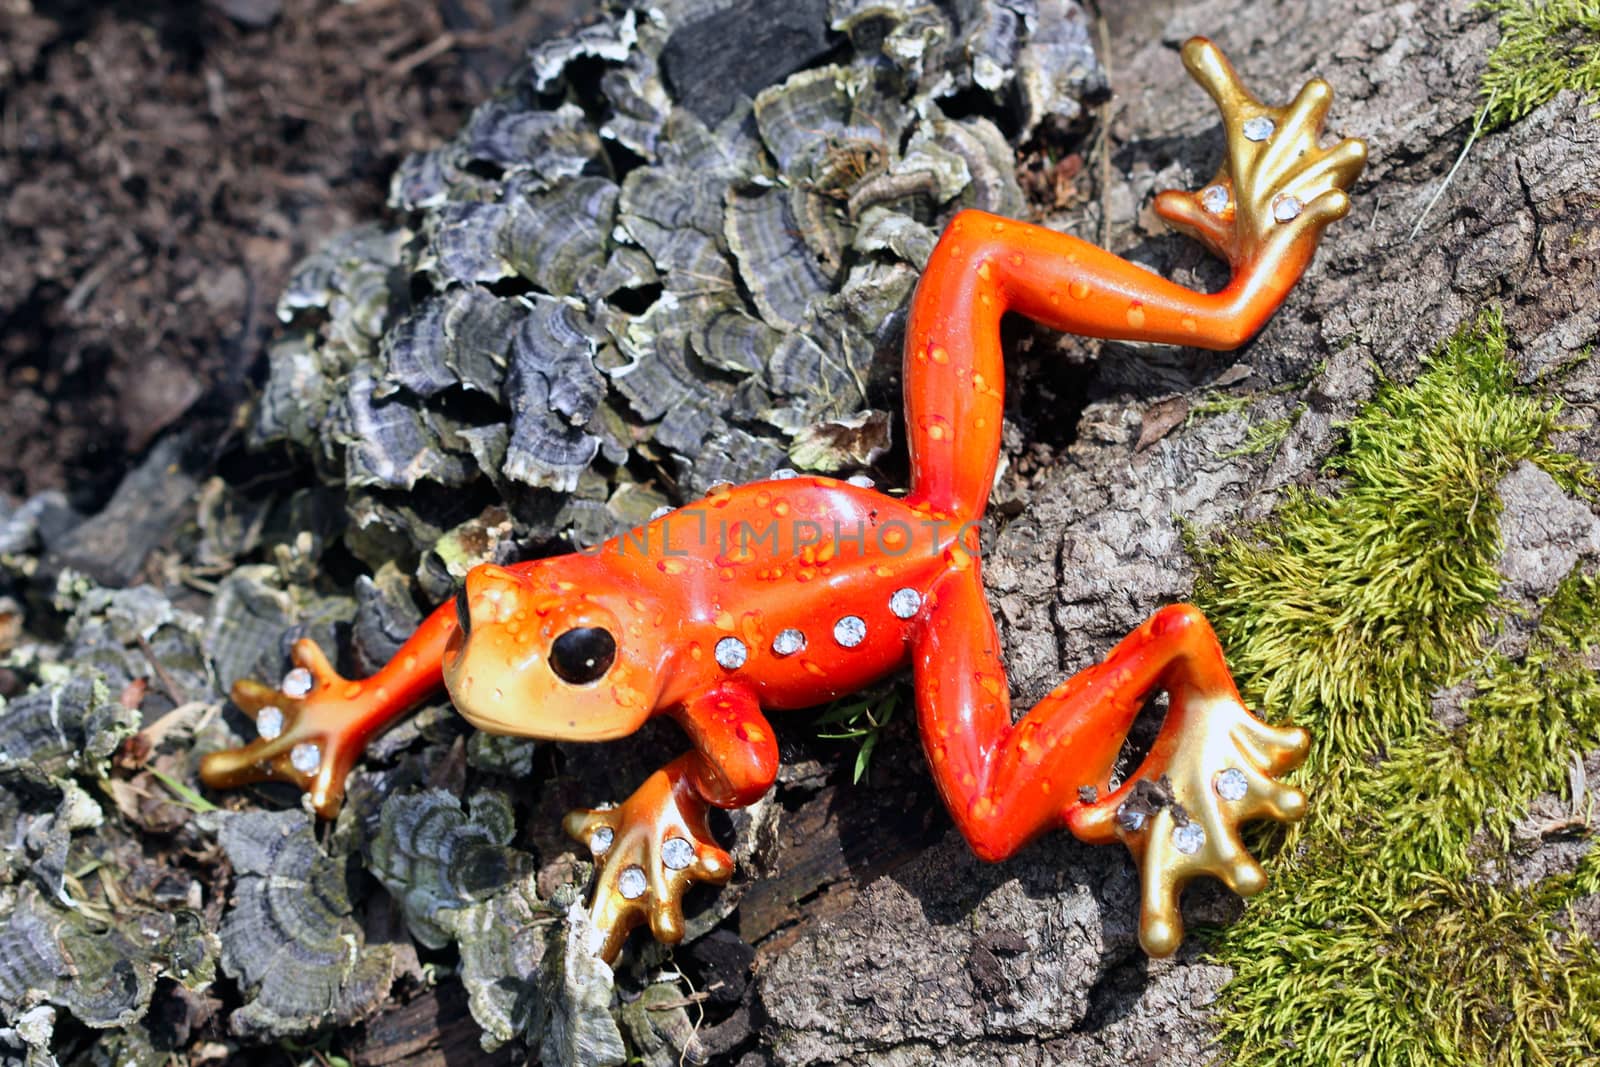 This ornamental orange frog is decorated with white crystal rhinestone jewels.